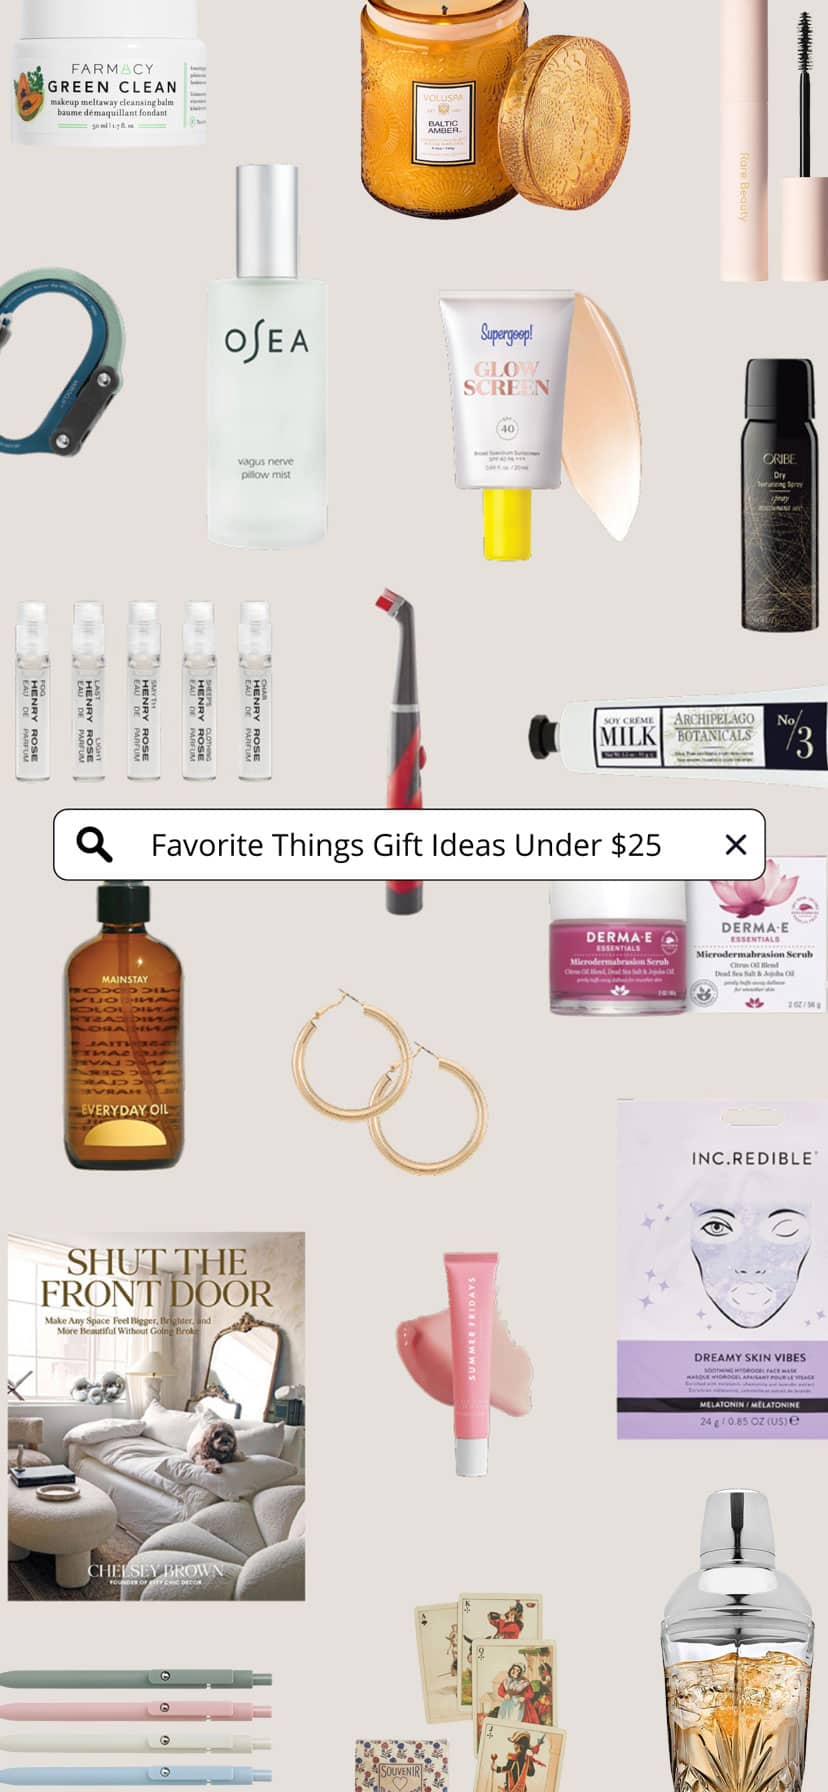 28 Gifts under $25: What I Would Bring to a Favorite Things Party